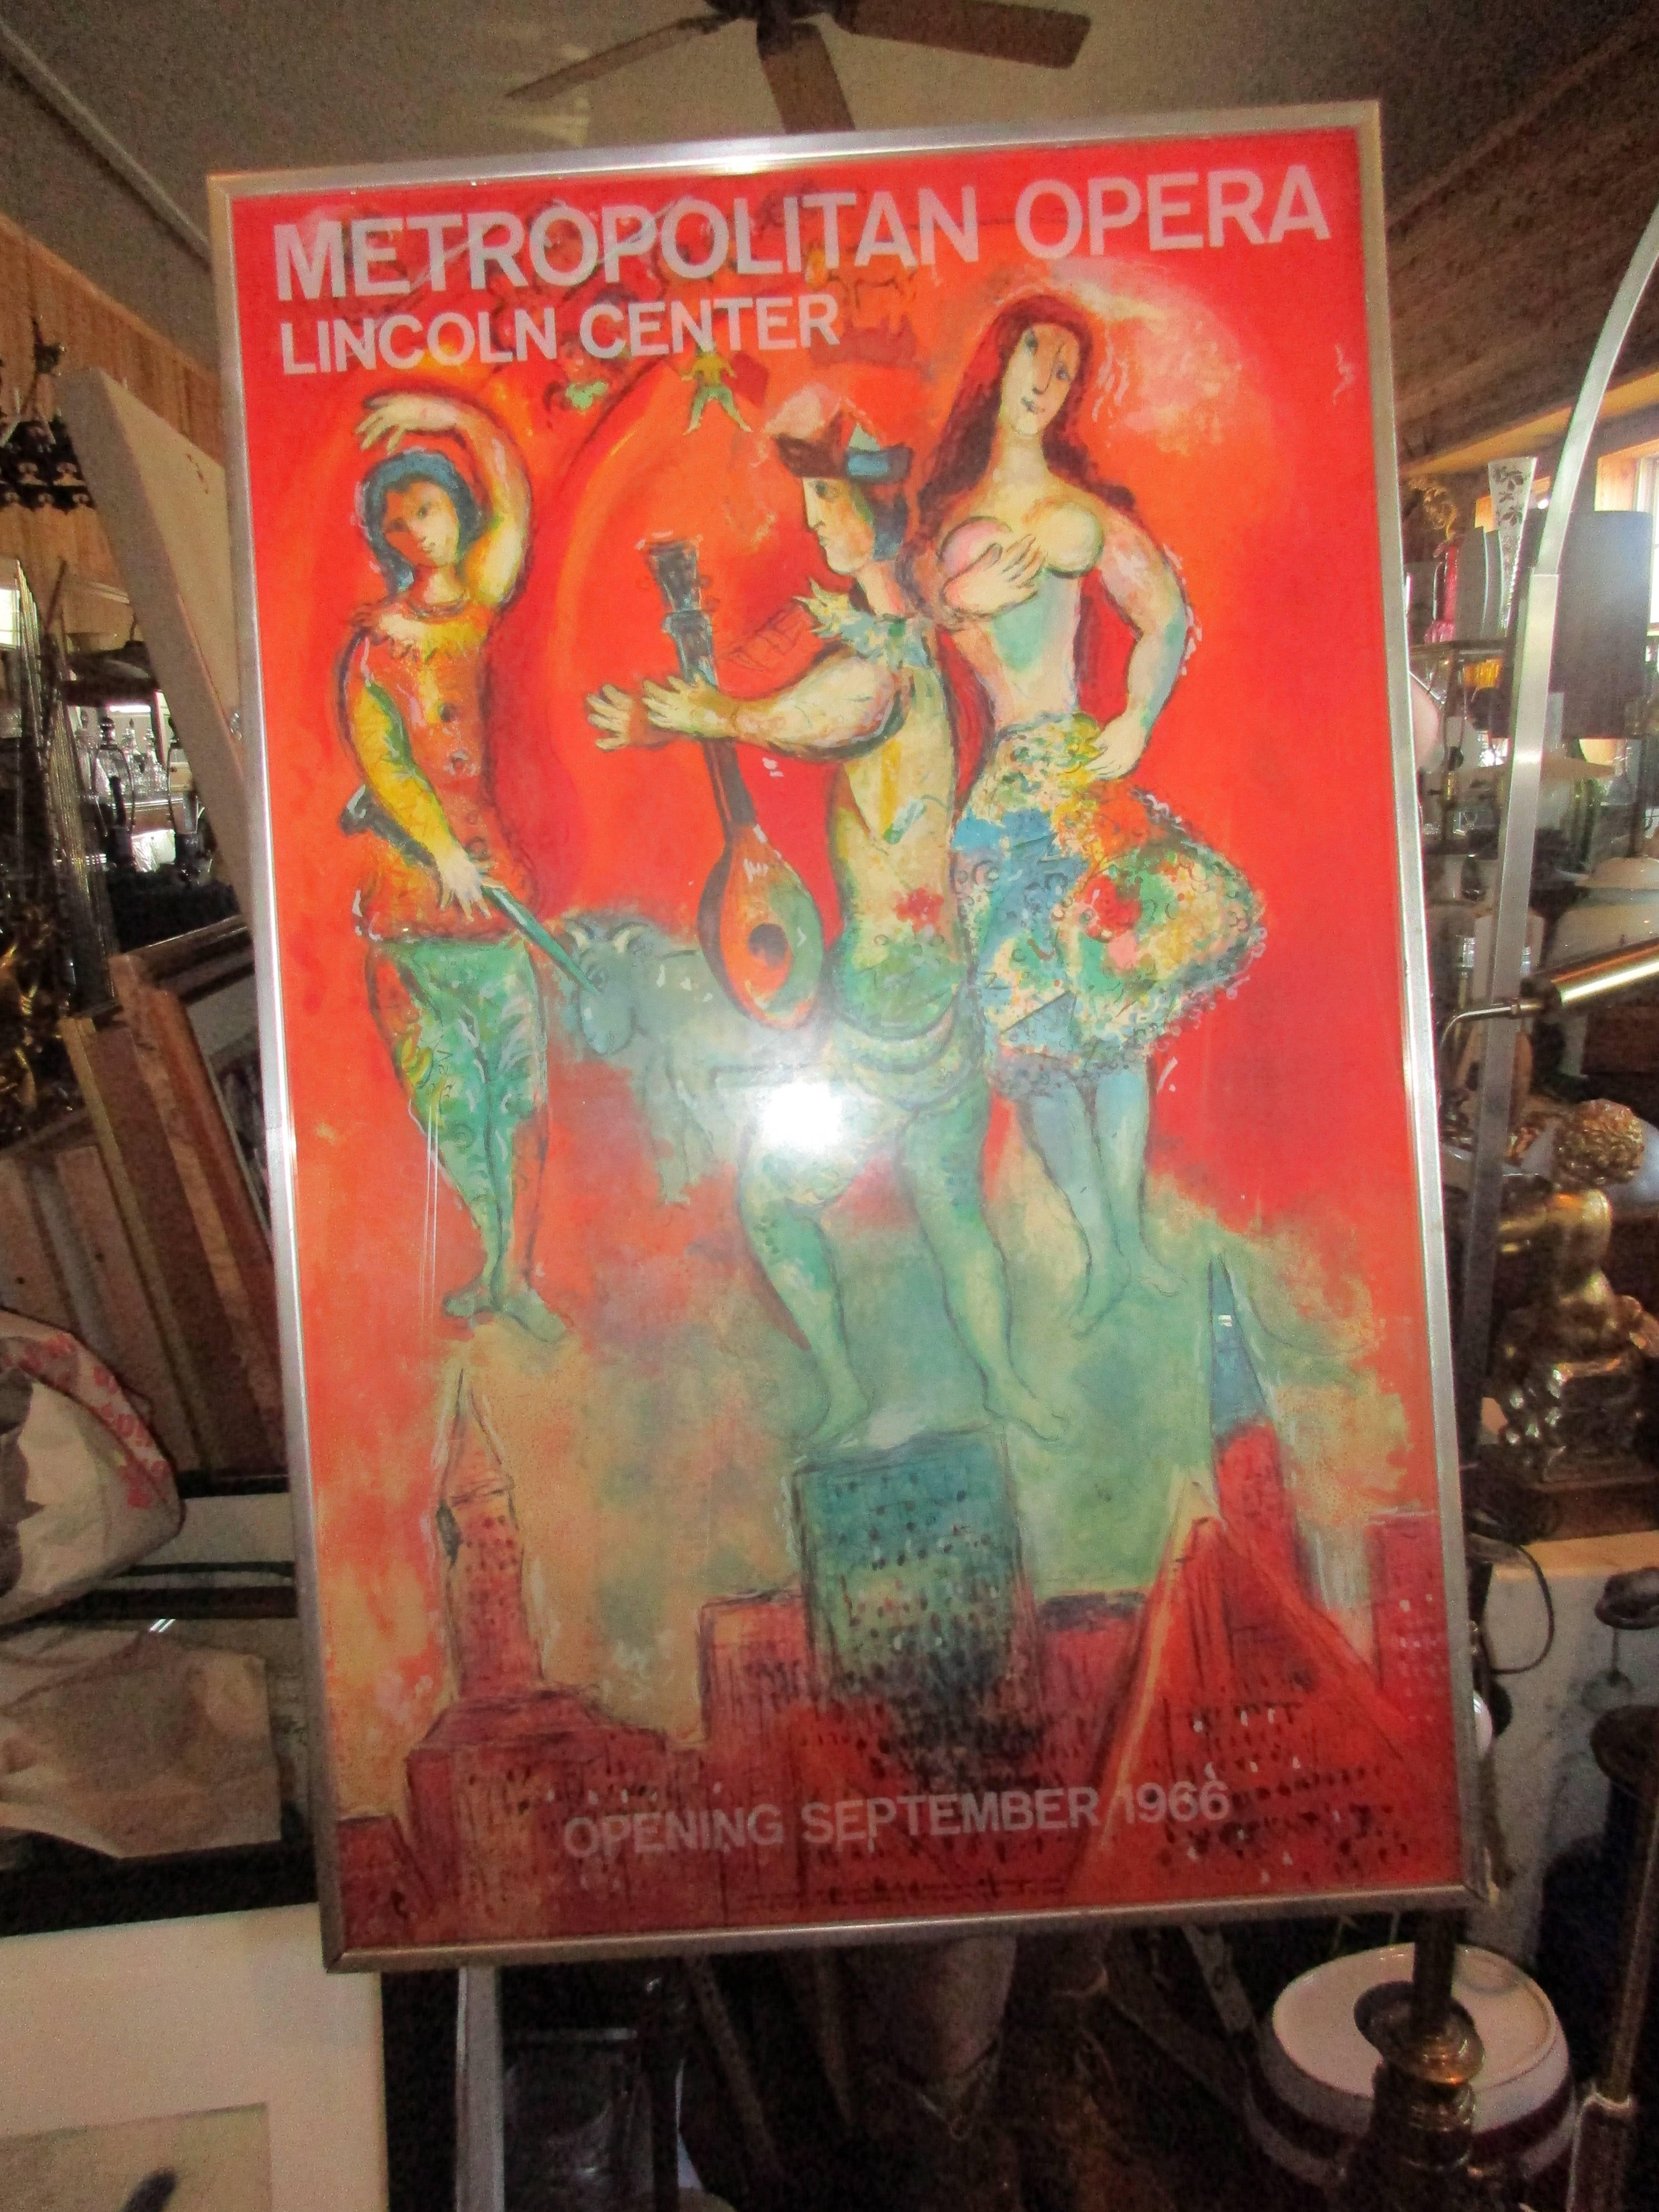 1966 original lithograph by Marc Chagall commissioned by the Metropolitan
Opera for their production of Carmen
An edition of 3000 printed by Mourlot, Paris
Original frame under glass.